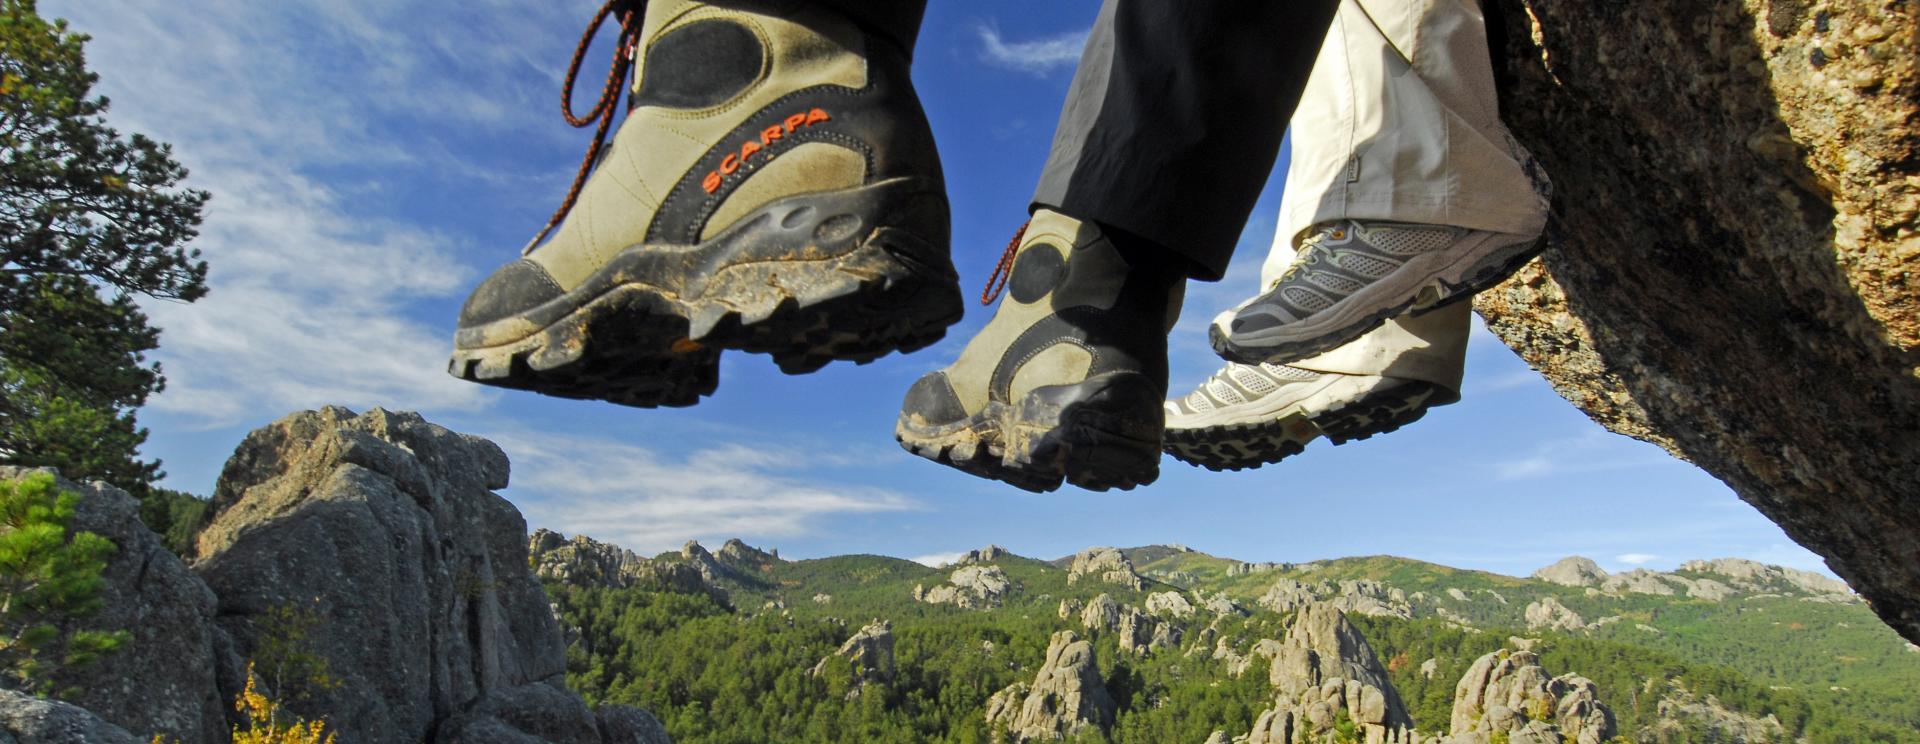 5 Hikes that will stretch your legs after a long drive (and are suitable for the whole family!)